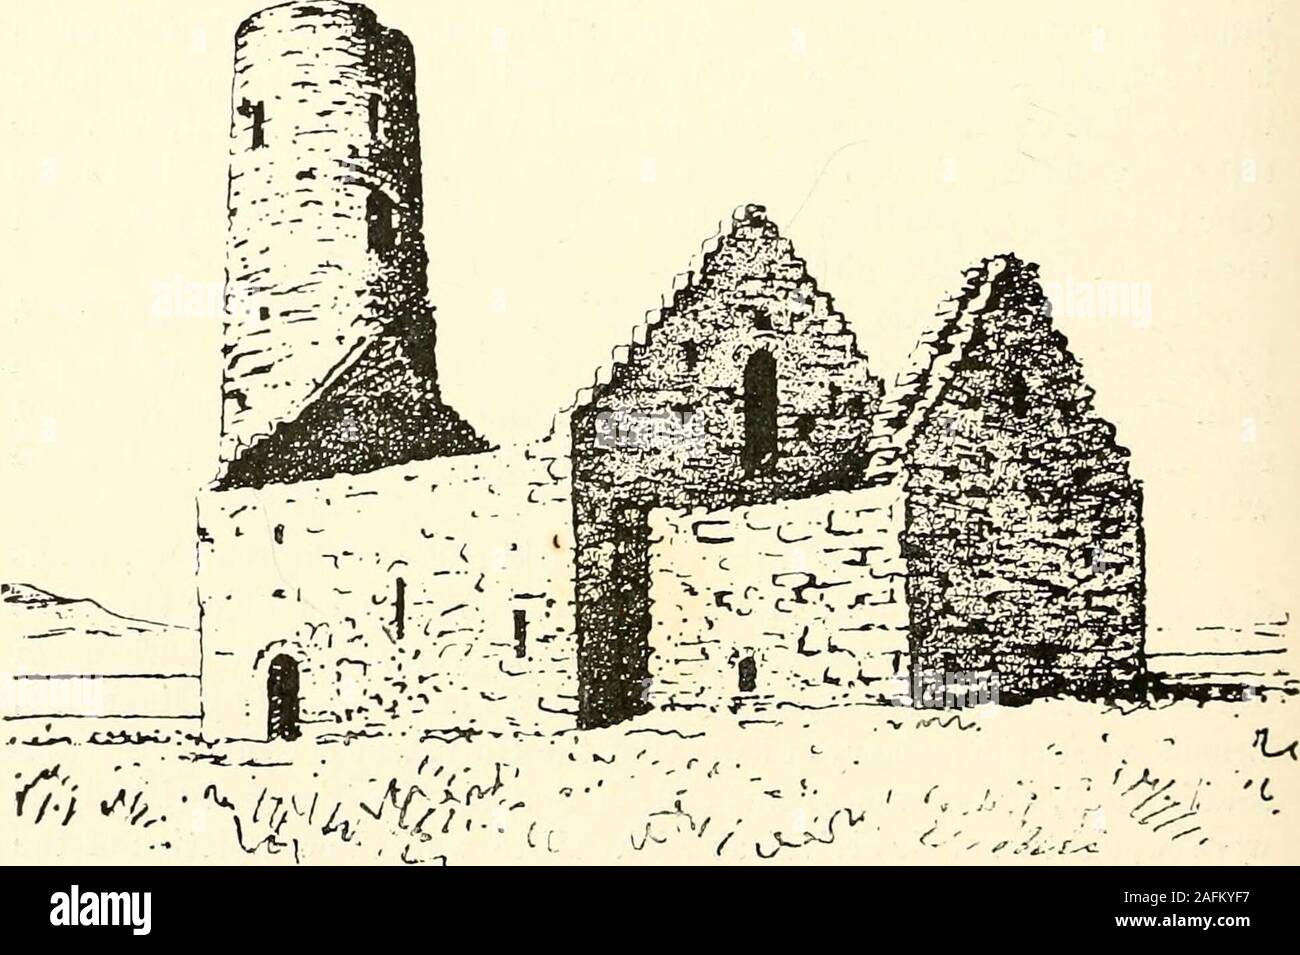 . Journal of the Royal Society of Antiquaries of Ireland. Plan of Church iu Egilsay. a proper name (Egils-isle), and the Celtic Eglais, from the Latin Ecclesia(church isle). The island is famous as having been the scene of thetragedy referred to, as well as from the fact tliat on it there is a very. Church in Egilsay. ancient church of unique structure. It is highly probable that it was onaccount of the presence of the church there that the earl cousins selectedit as a meeting-place to arrange their differences. Tbe church consists PROCEEDINGS. 295 of nave and chancel with a round tower incorp Stock Photo